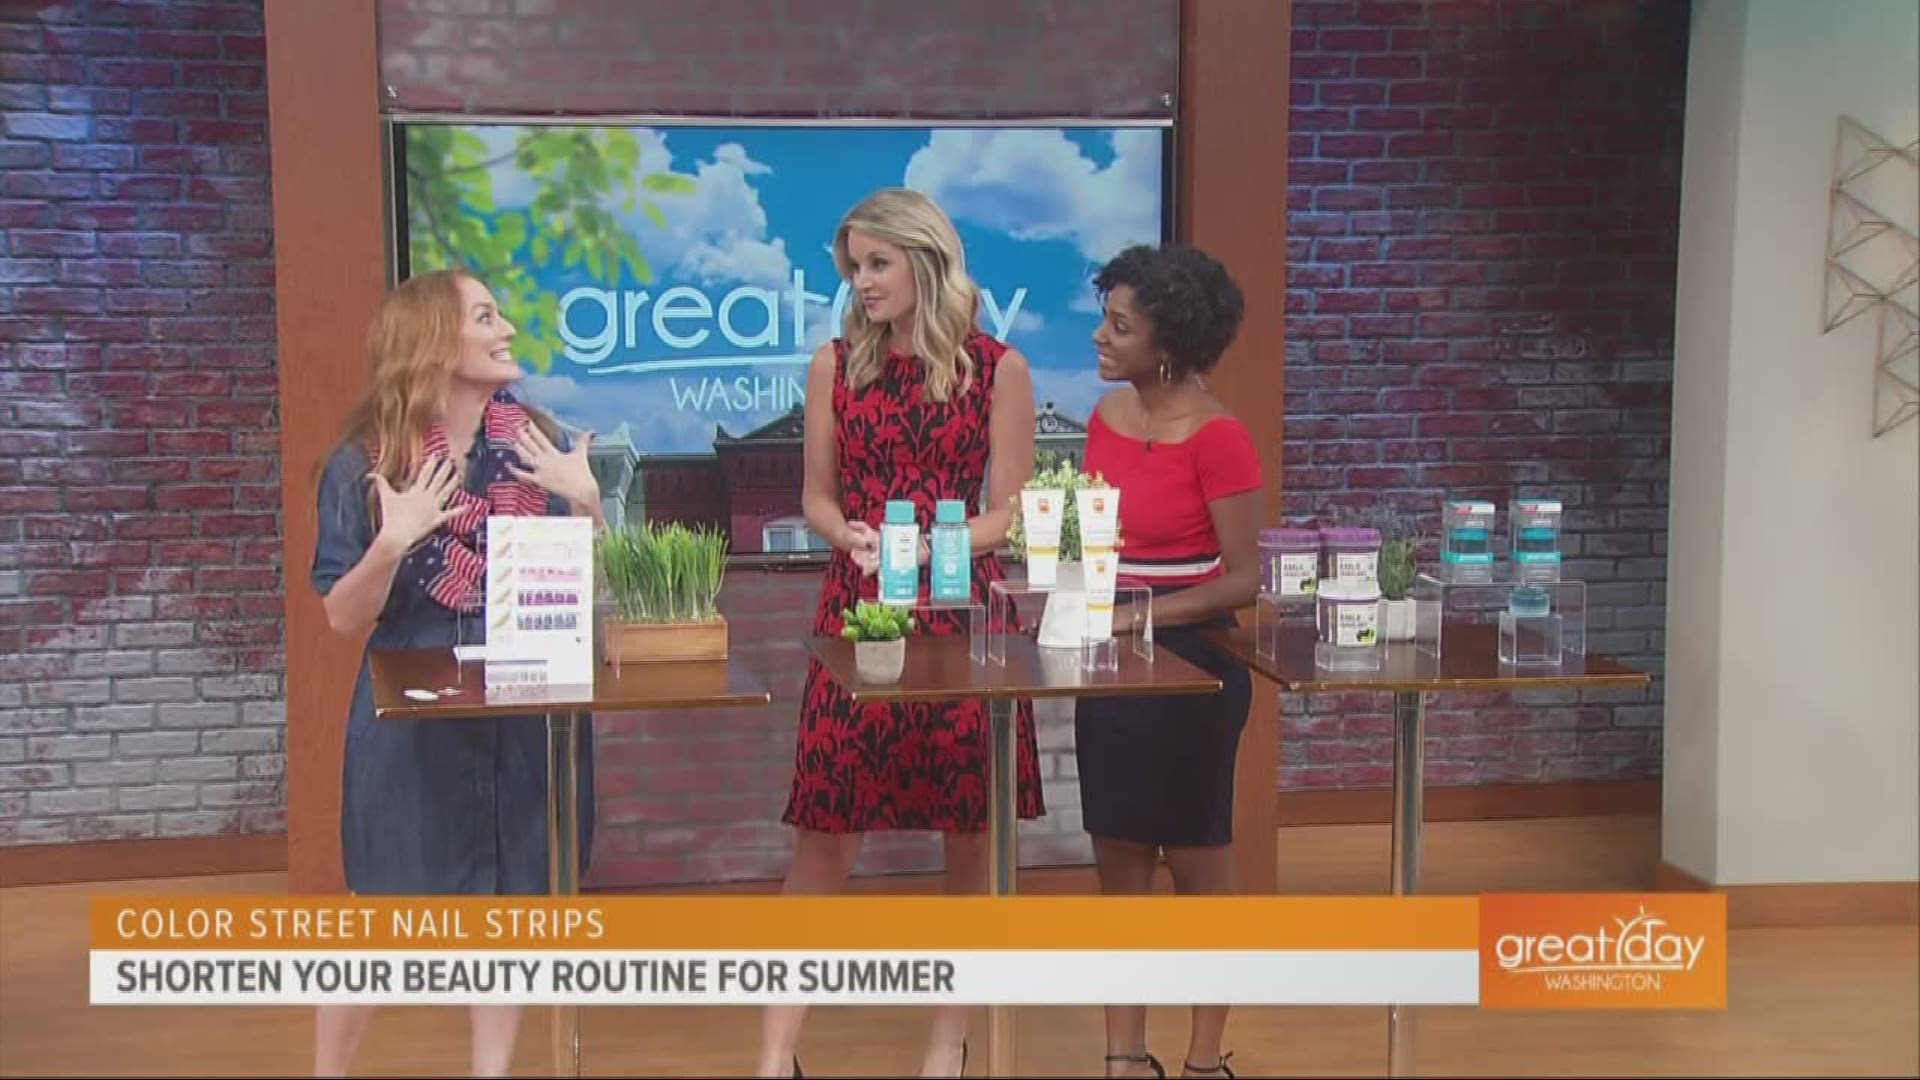 Beauty guru, Cheryl Kramer Kaye shares some easy and reliable beauty products that are perfect for the summer.